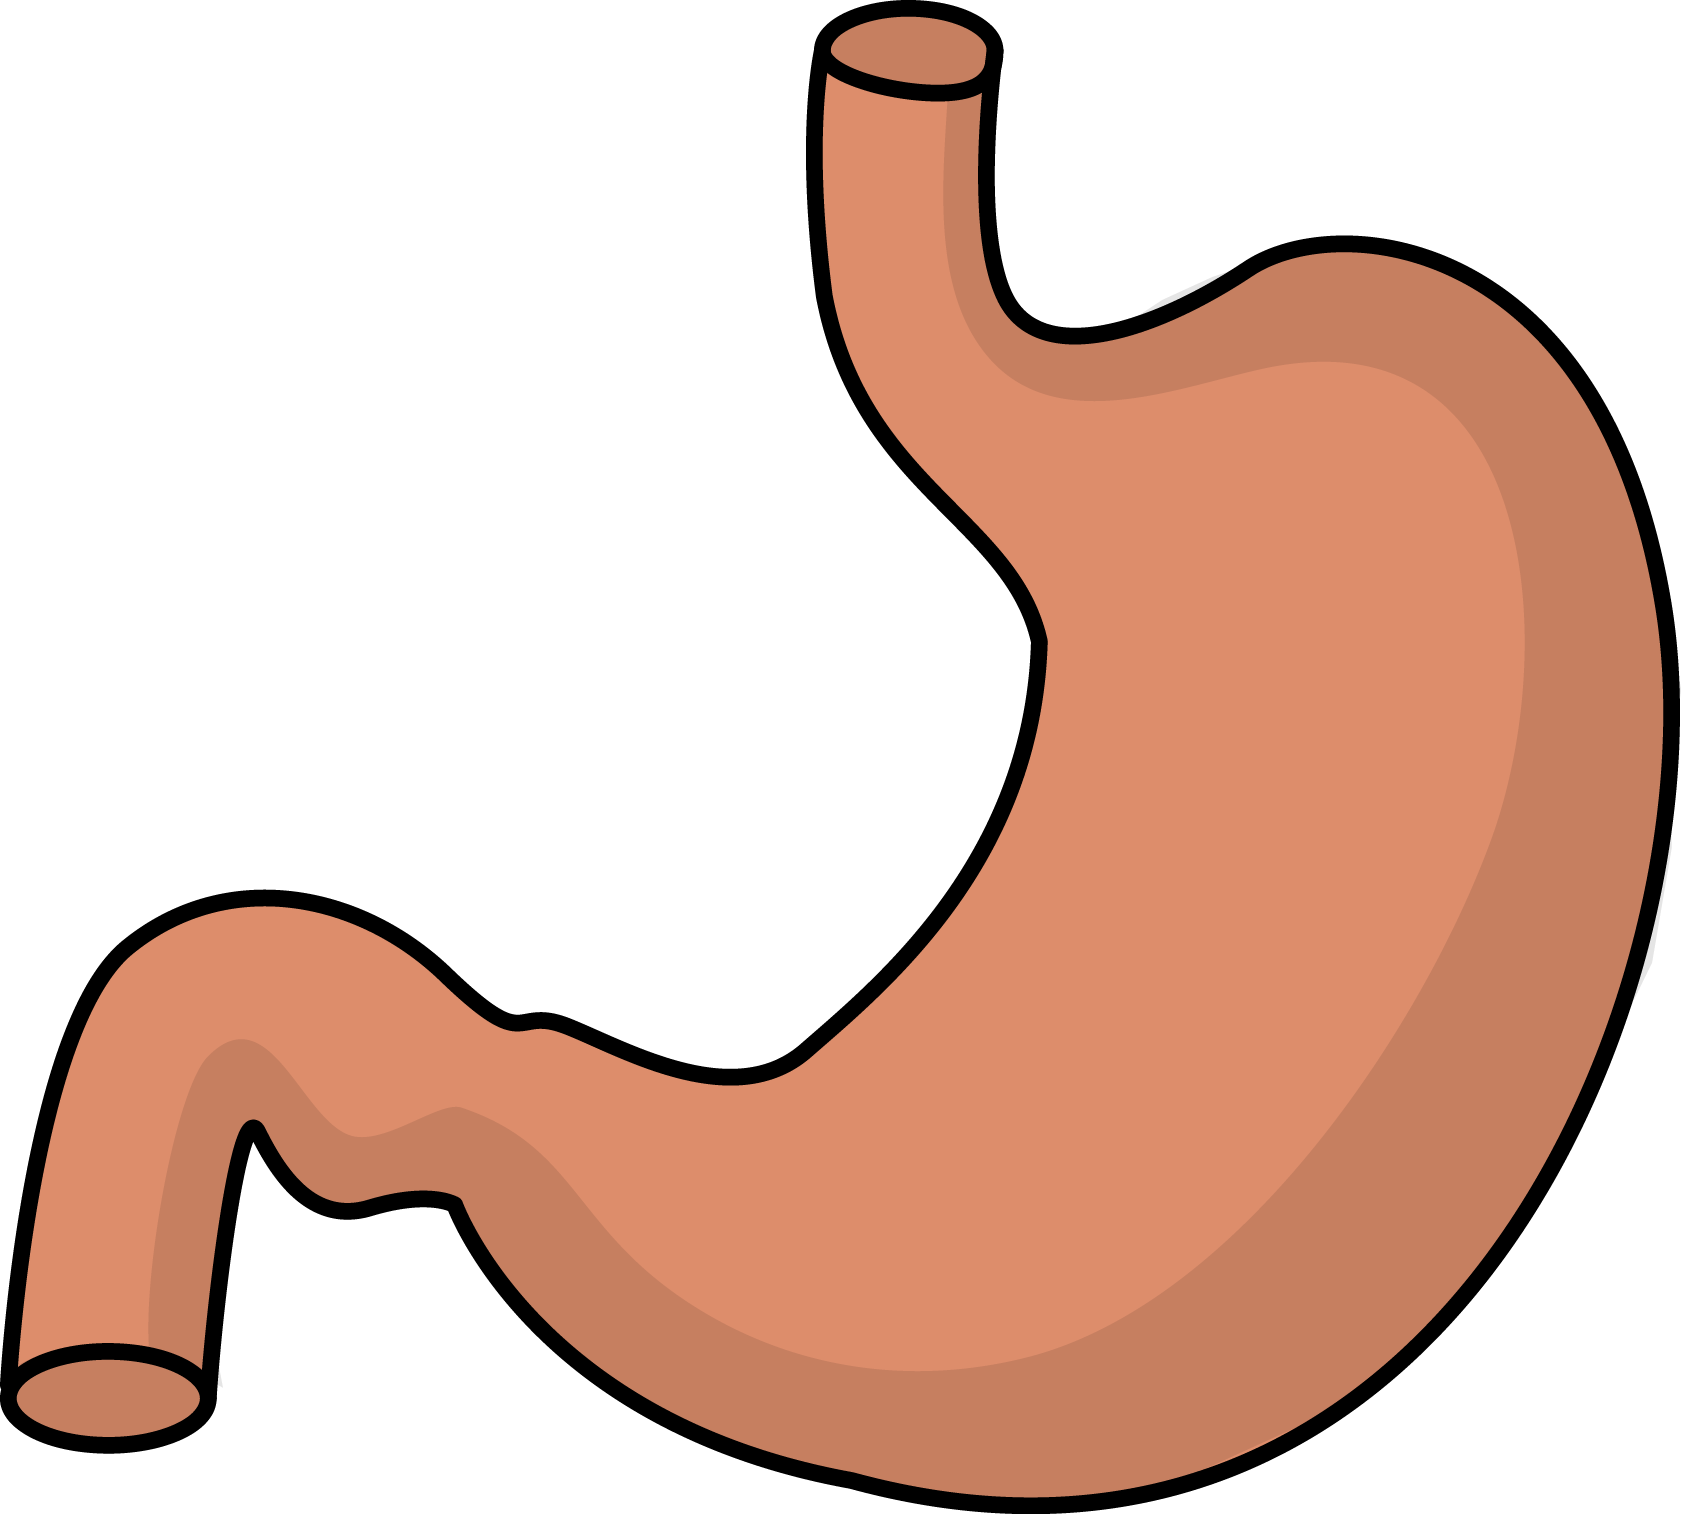 Stomach PNG HD - 128974